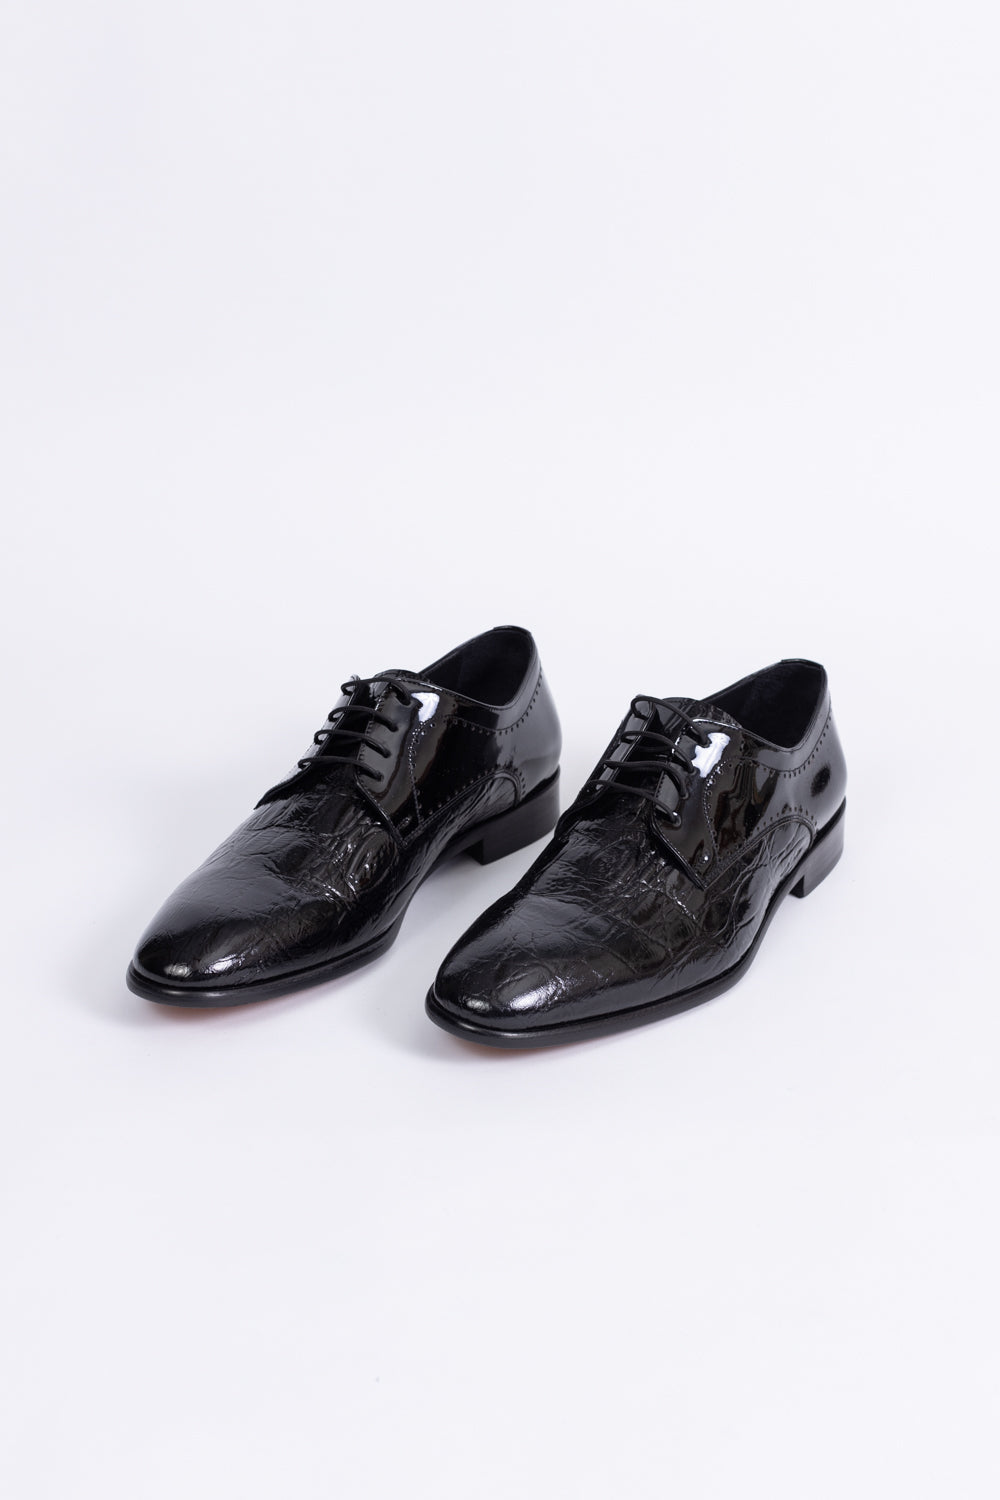 Classic Leather Oxford Shoes 351